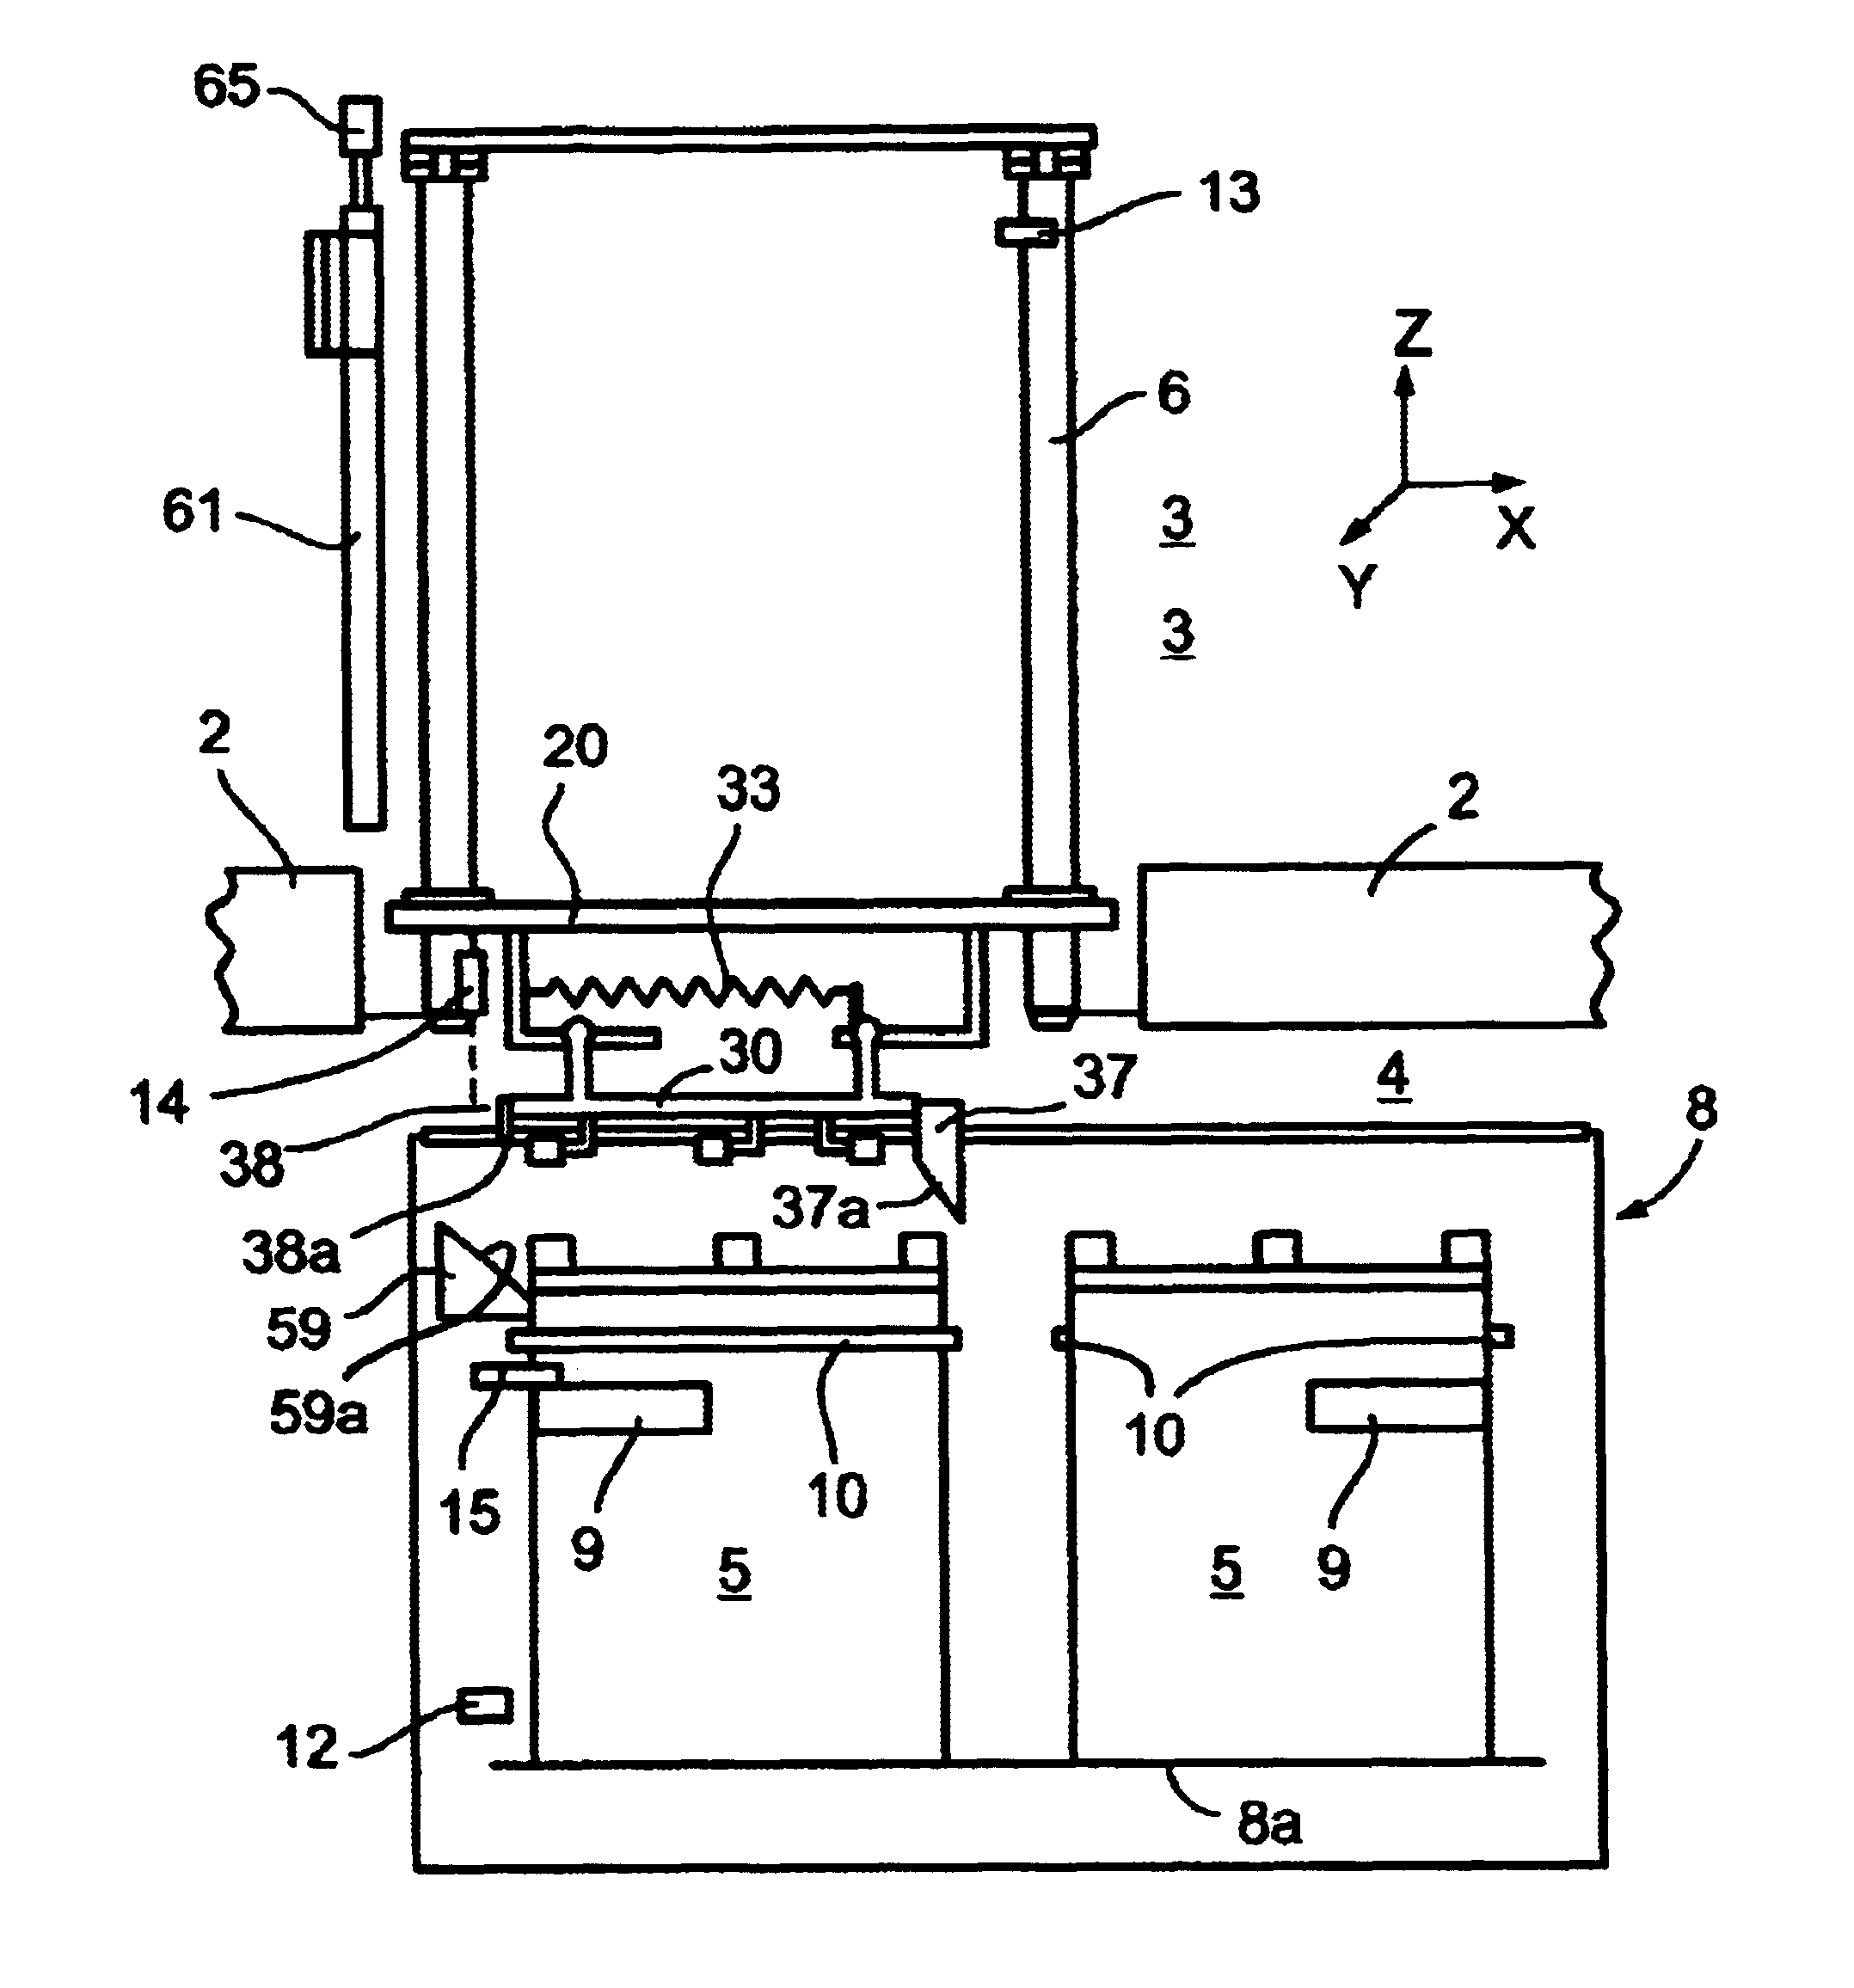 Container lifting apparatus particularly useful in aircraft for storing and retrieving galley articles in the cargo hold